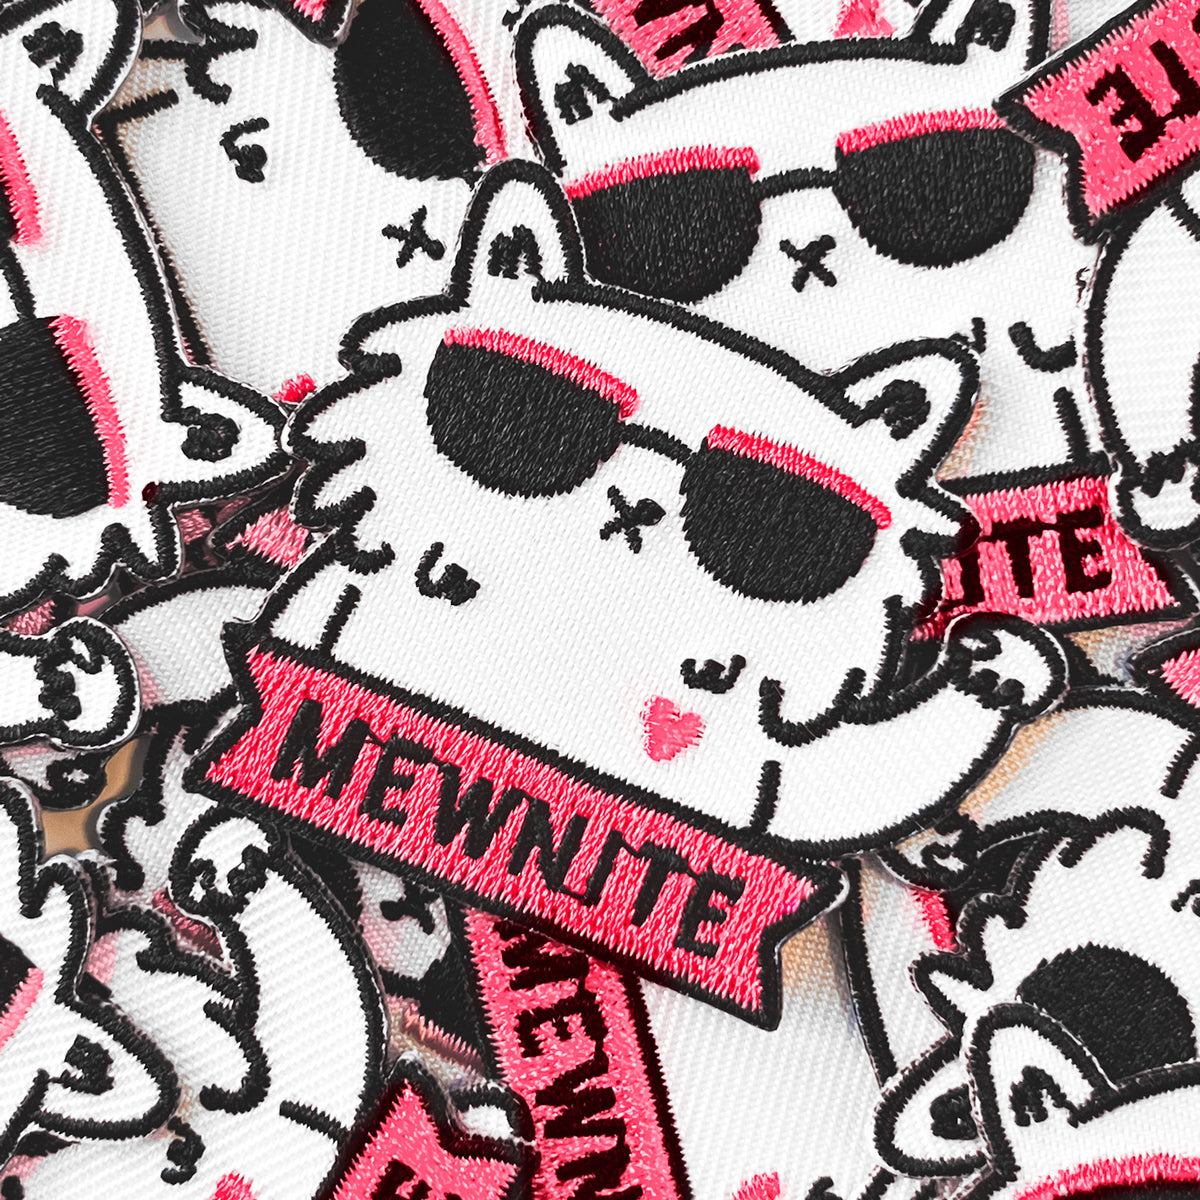 Mewnite ~ Embroidered Iron-On Cat Patch by My Cat Is People